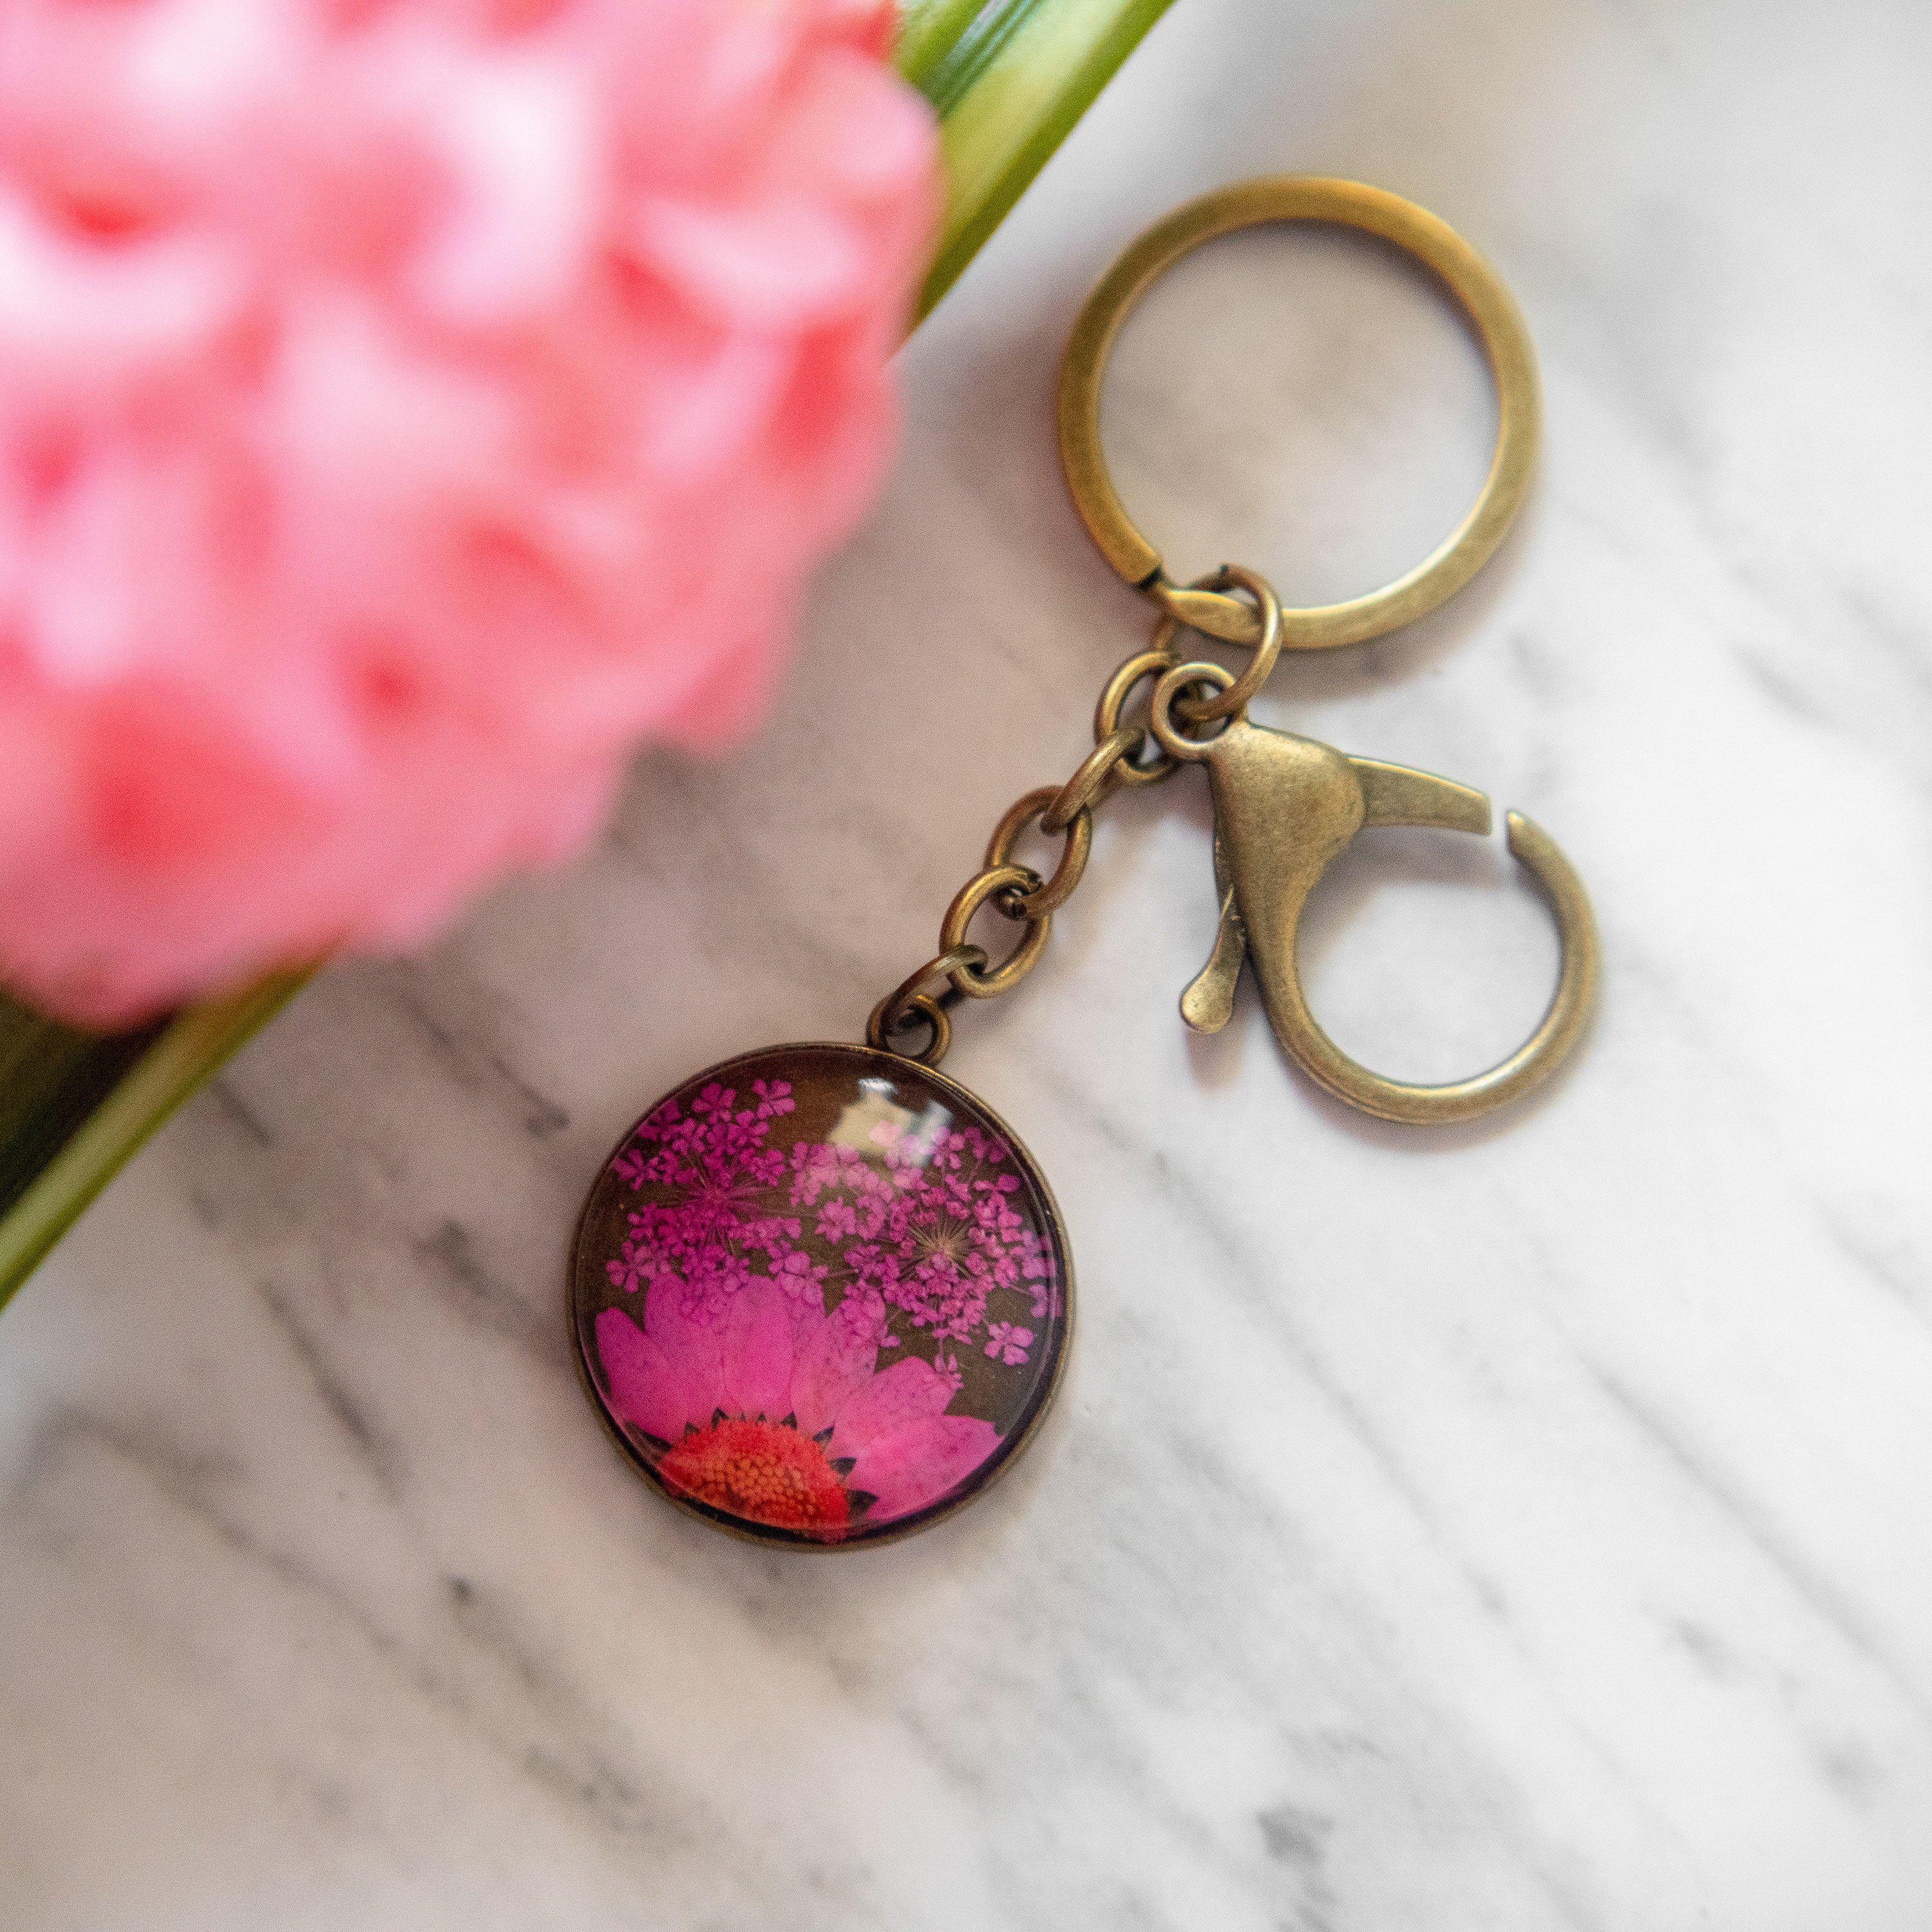 Real Pressed Flower Resin Keychain with Daisy and Lace Floral Neverland Floralfy 07